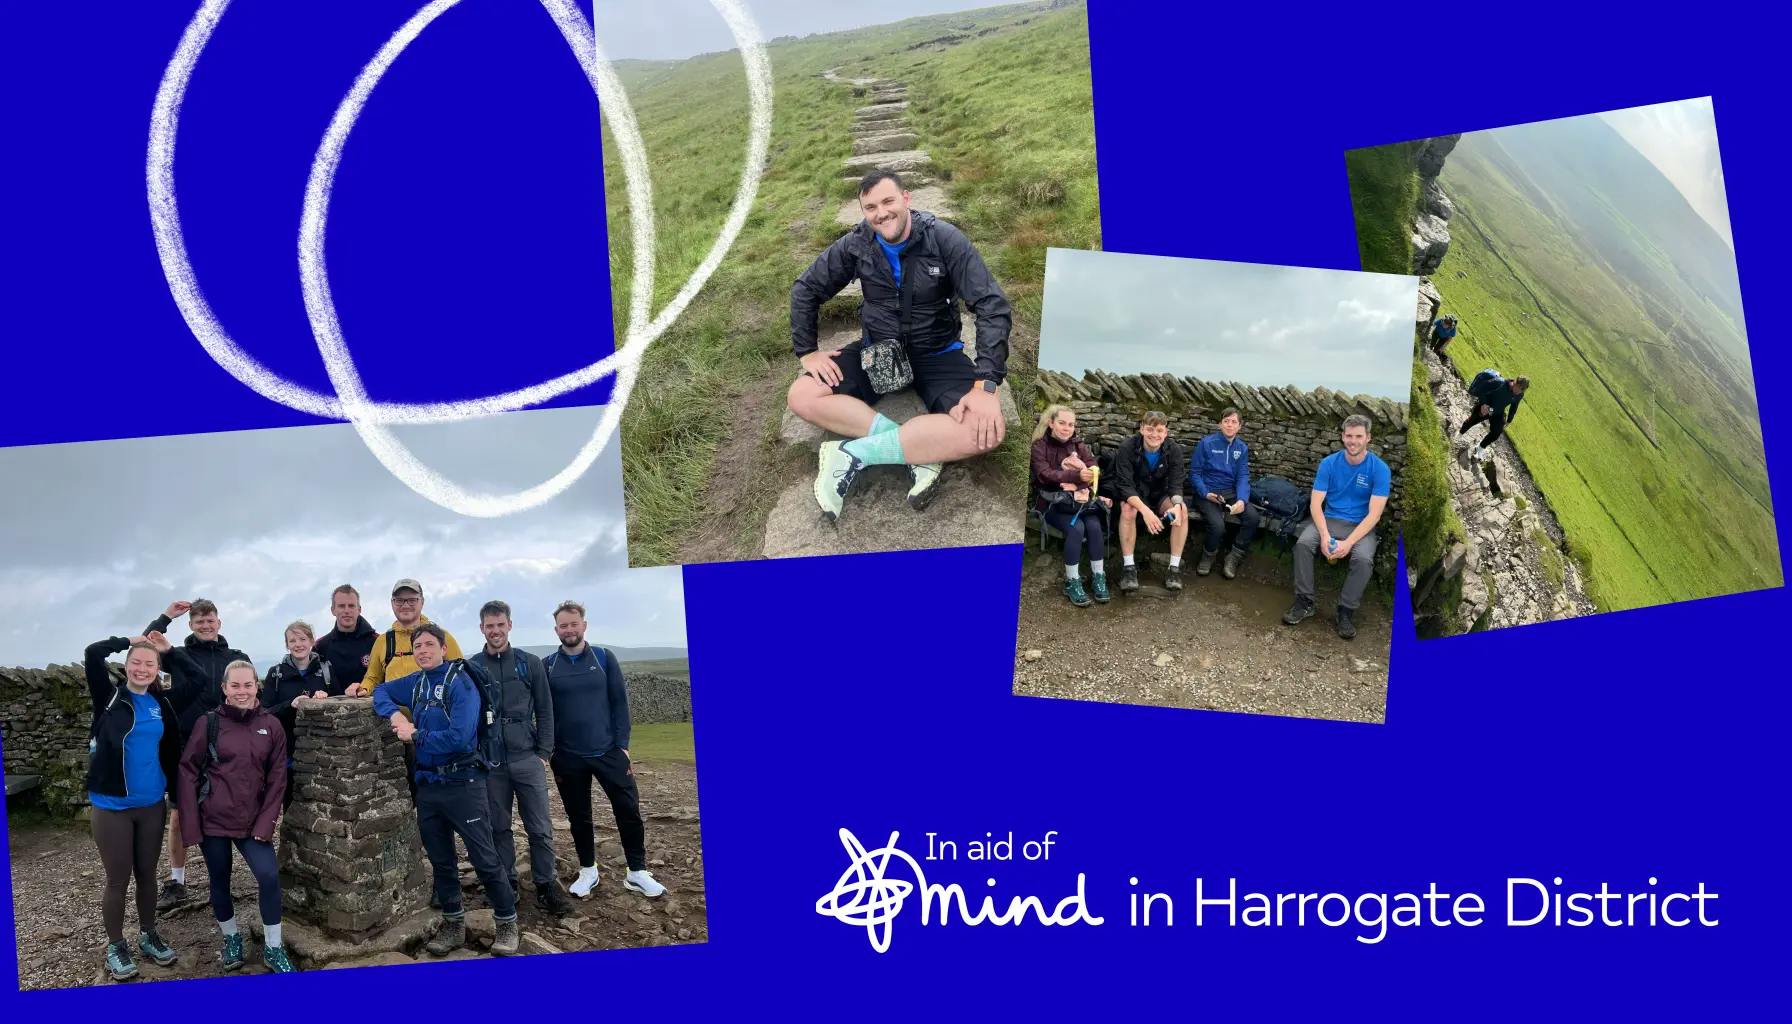 a collage image of team members on a hike